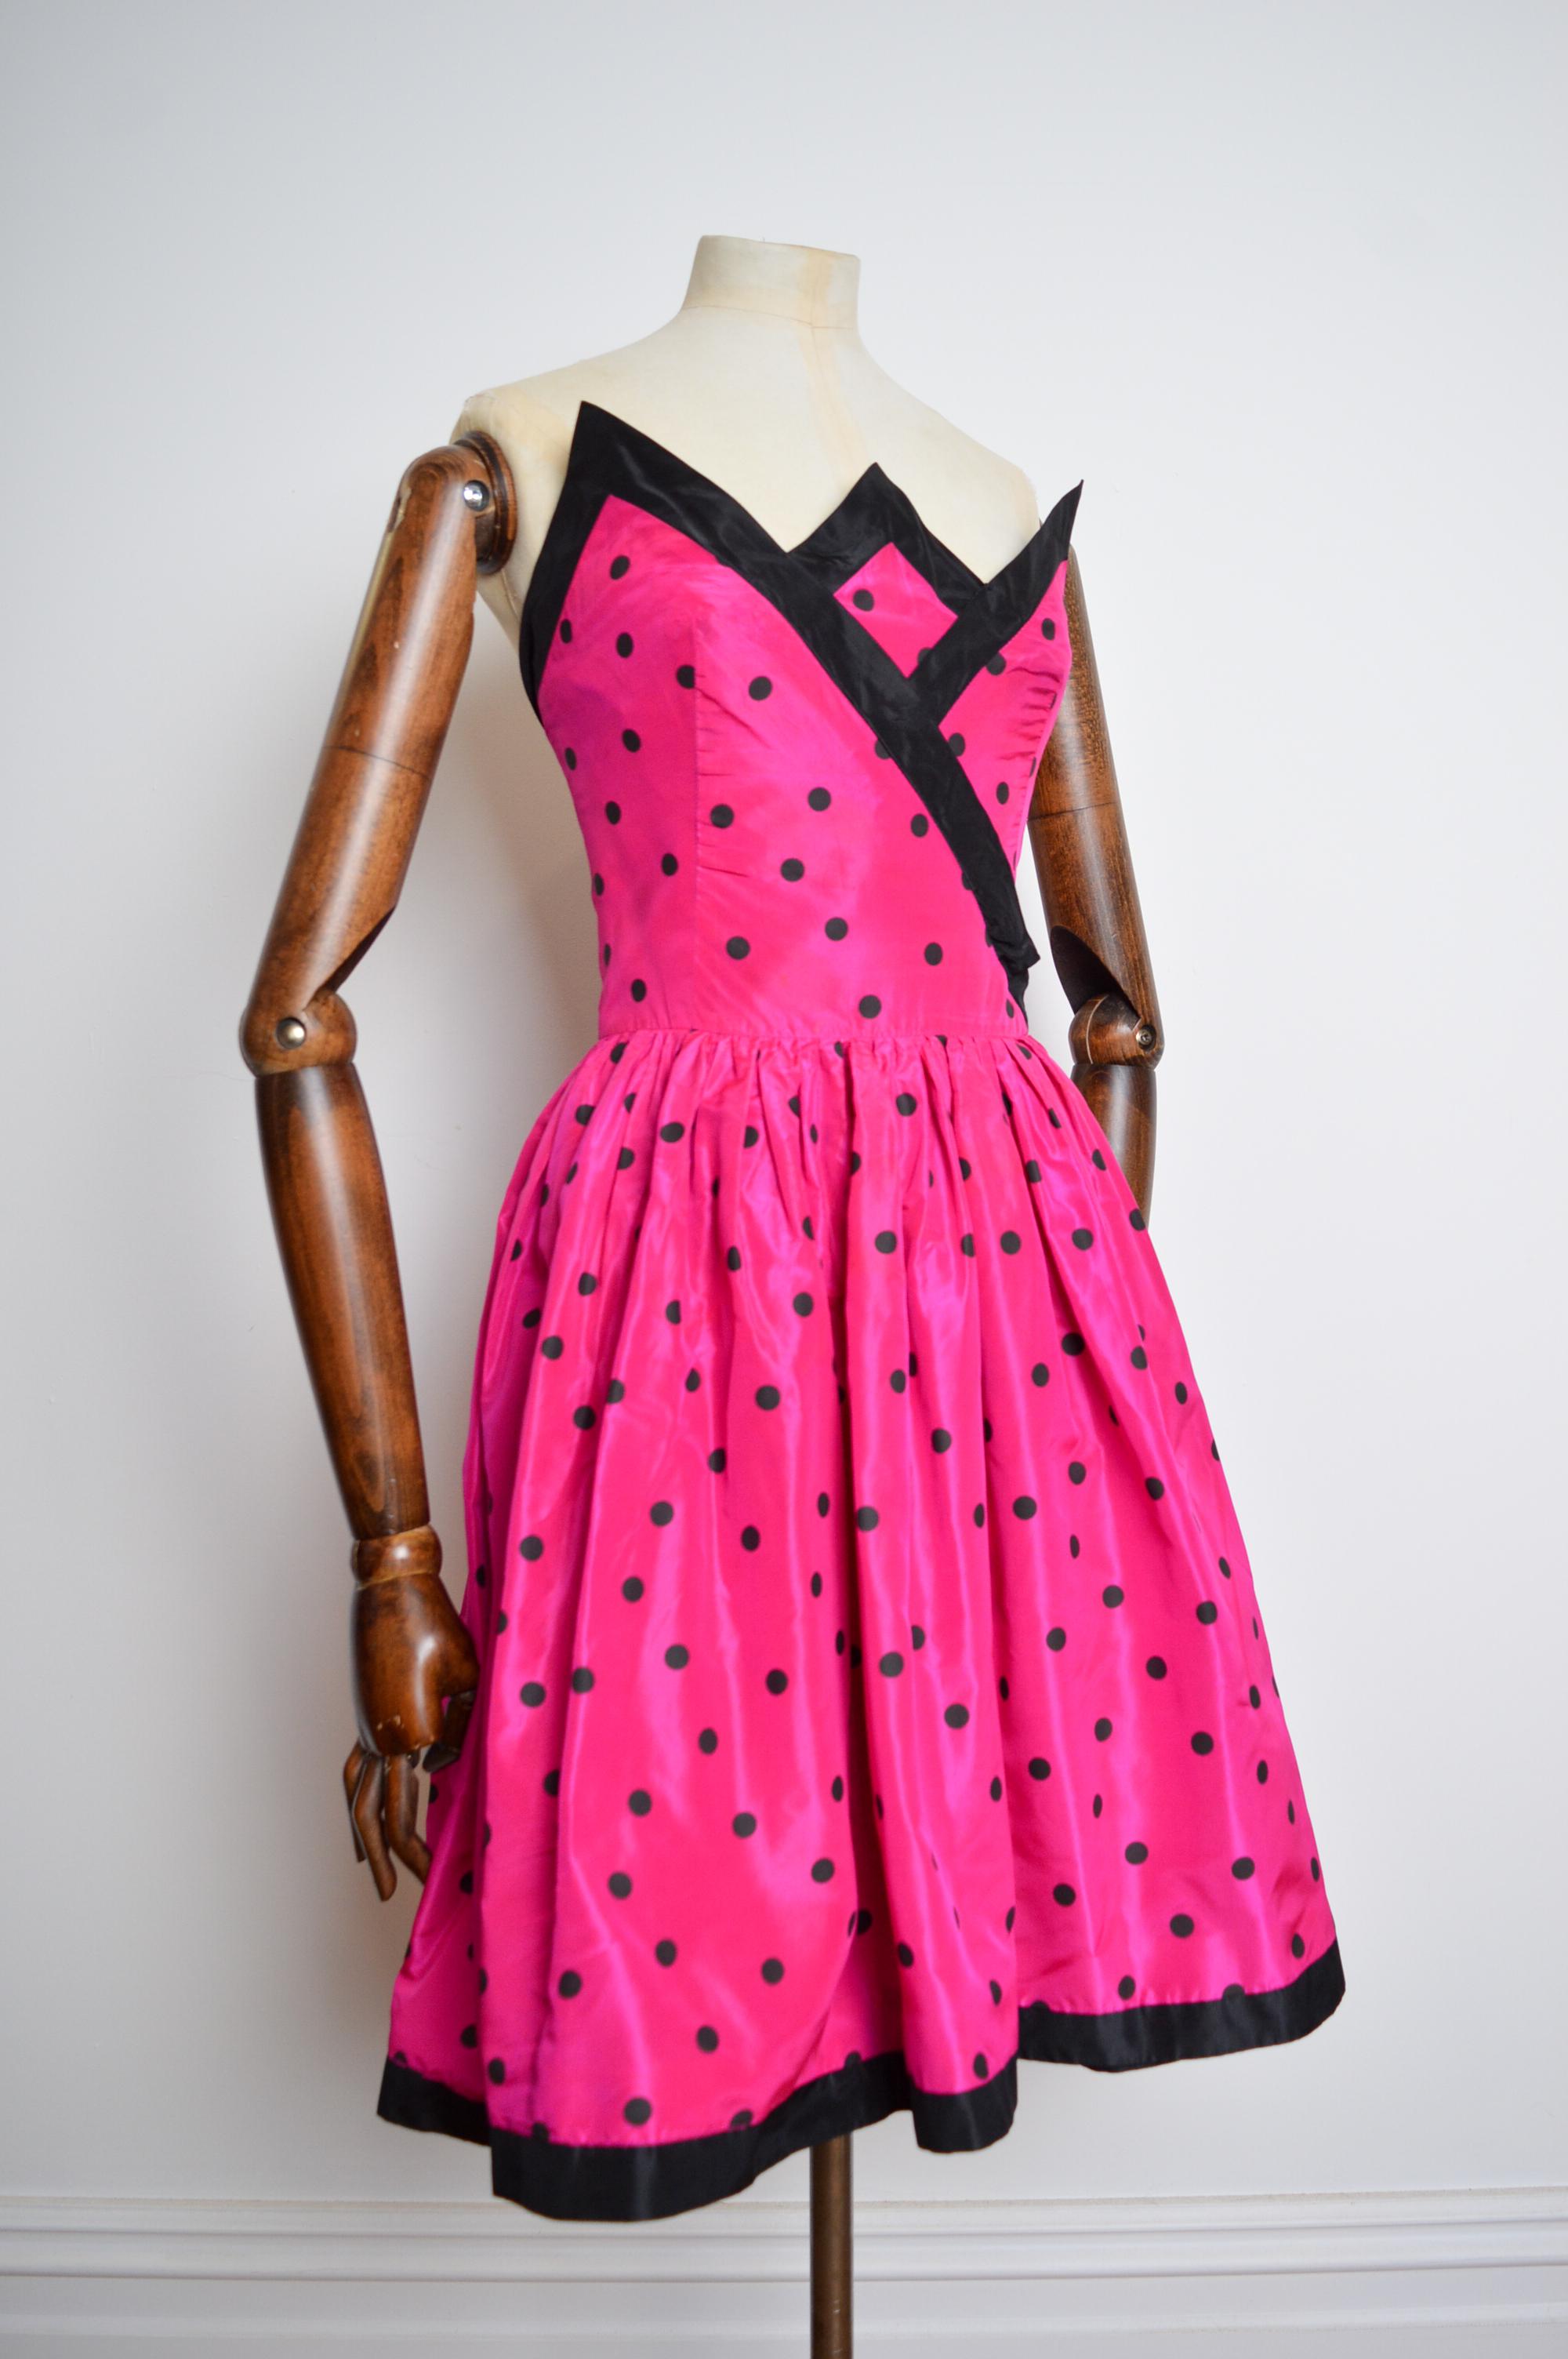 BALENCIAGA Hot Pink Strapless Polka dot Cocktail Dress by Josephus Thimister In Good Condition For Sale In Sheffield, GB